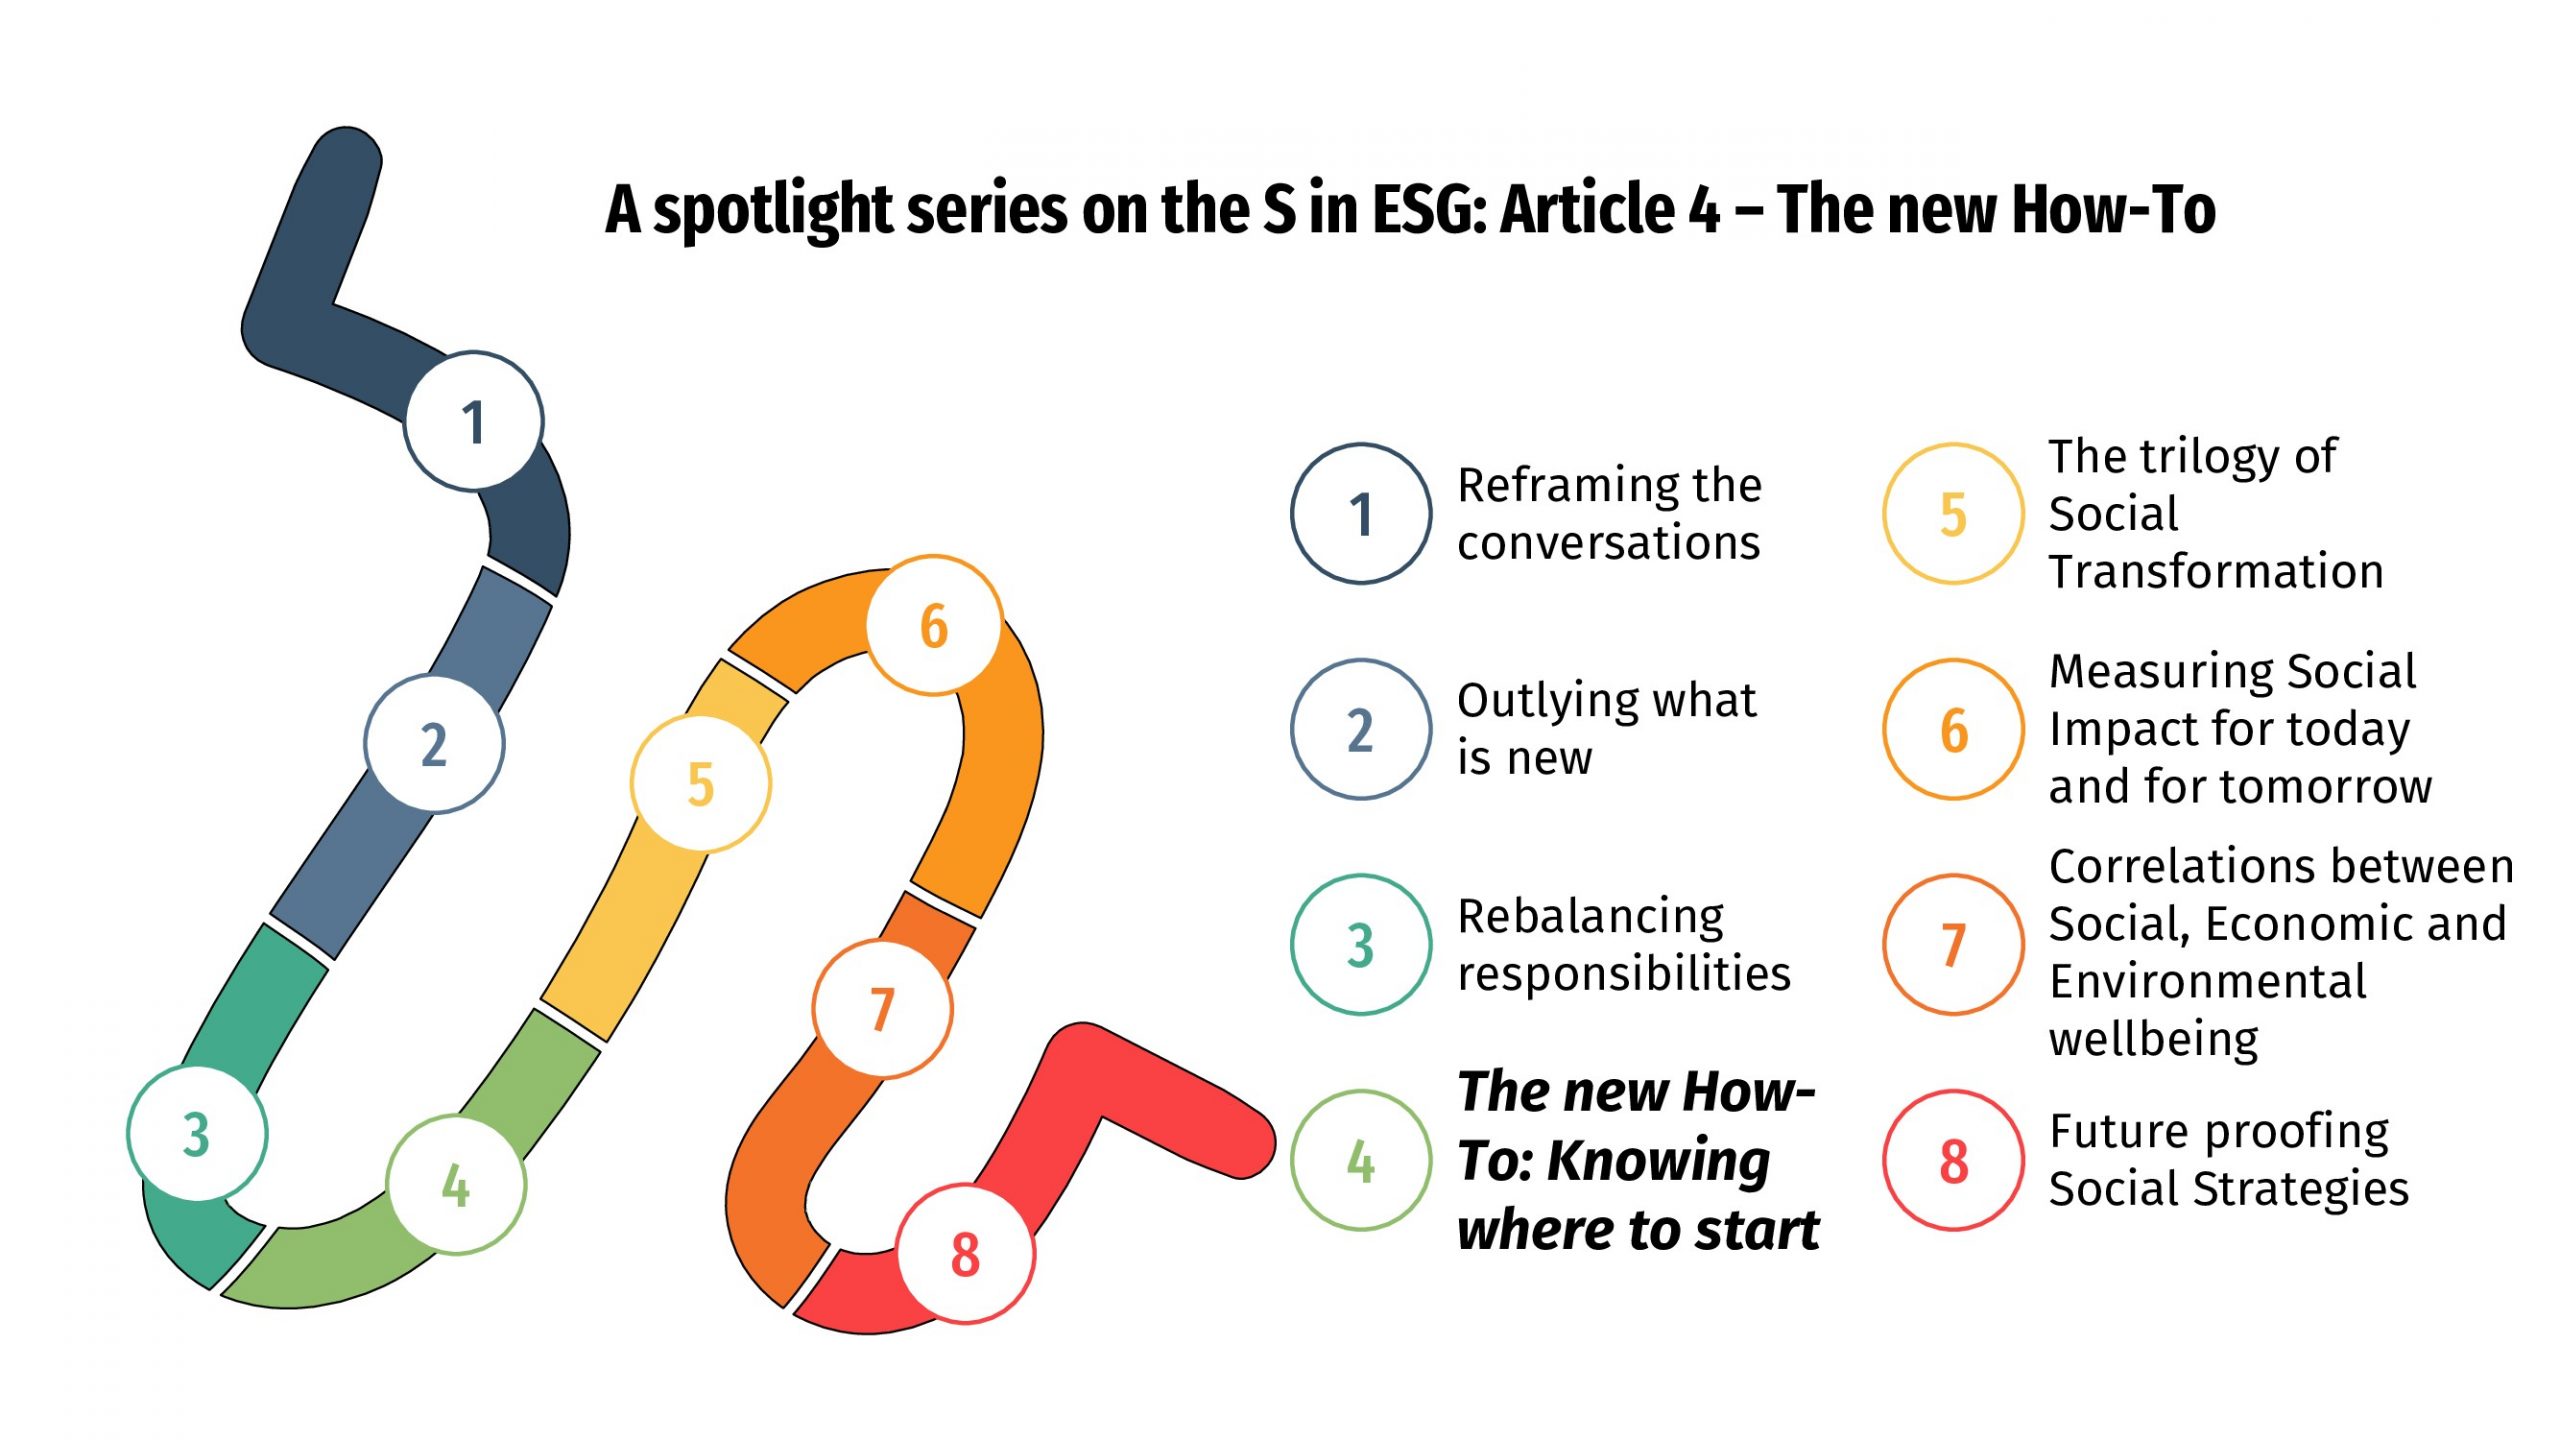 ESG - Knowing where to start - the new how-to